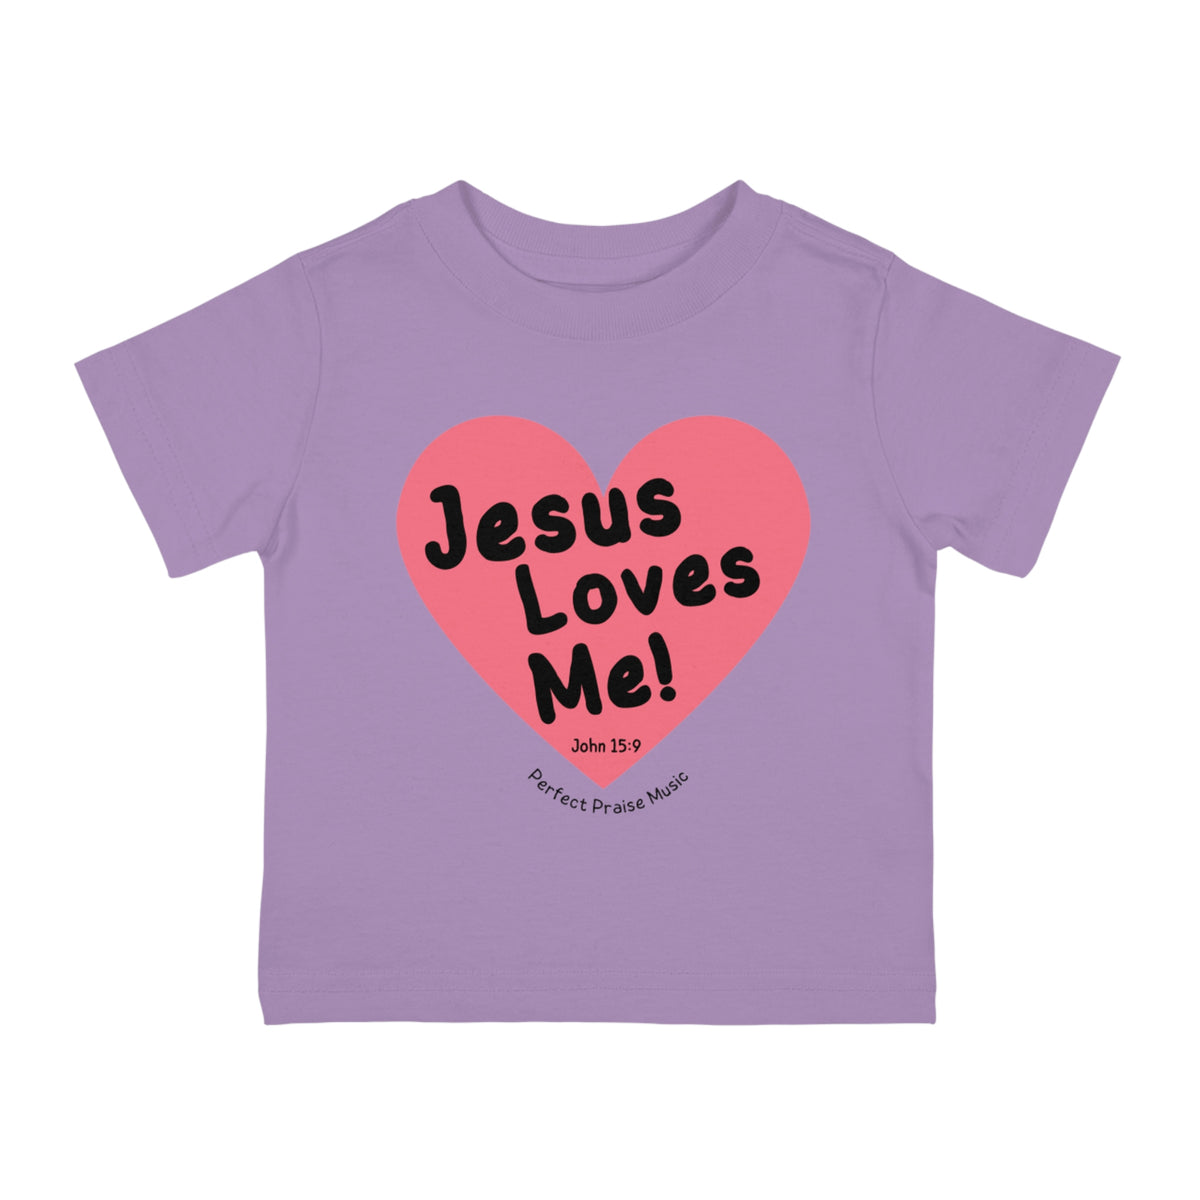 Jesus Love em Toddler Tee shirt will become your child&#39;s favorite Christian apparel. Comes in many colors and sizes.